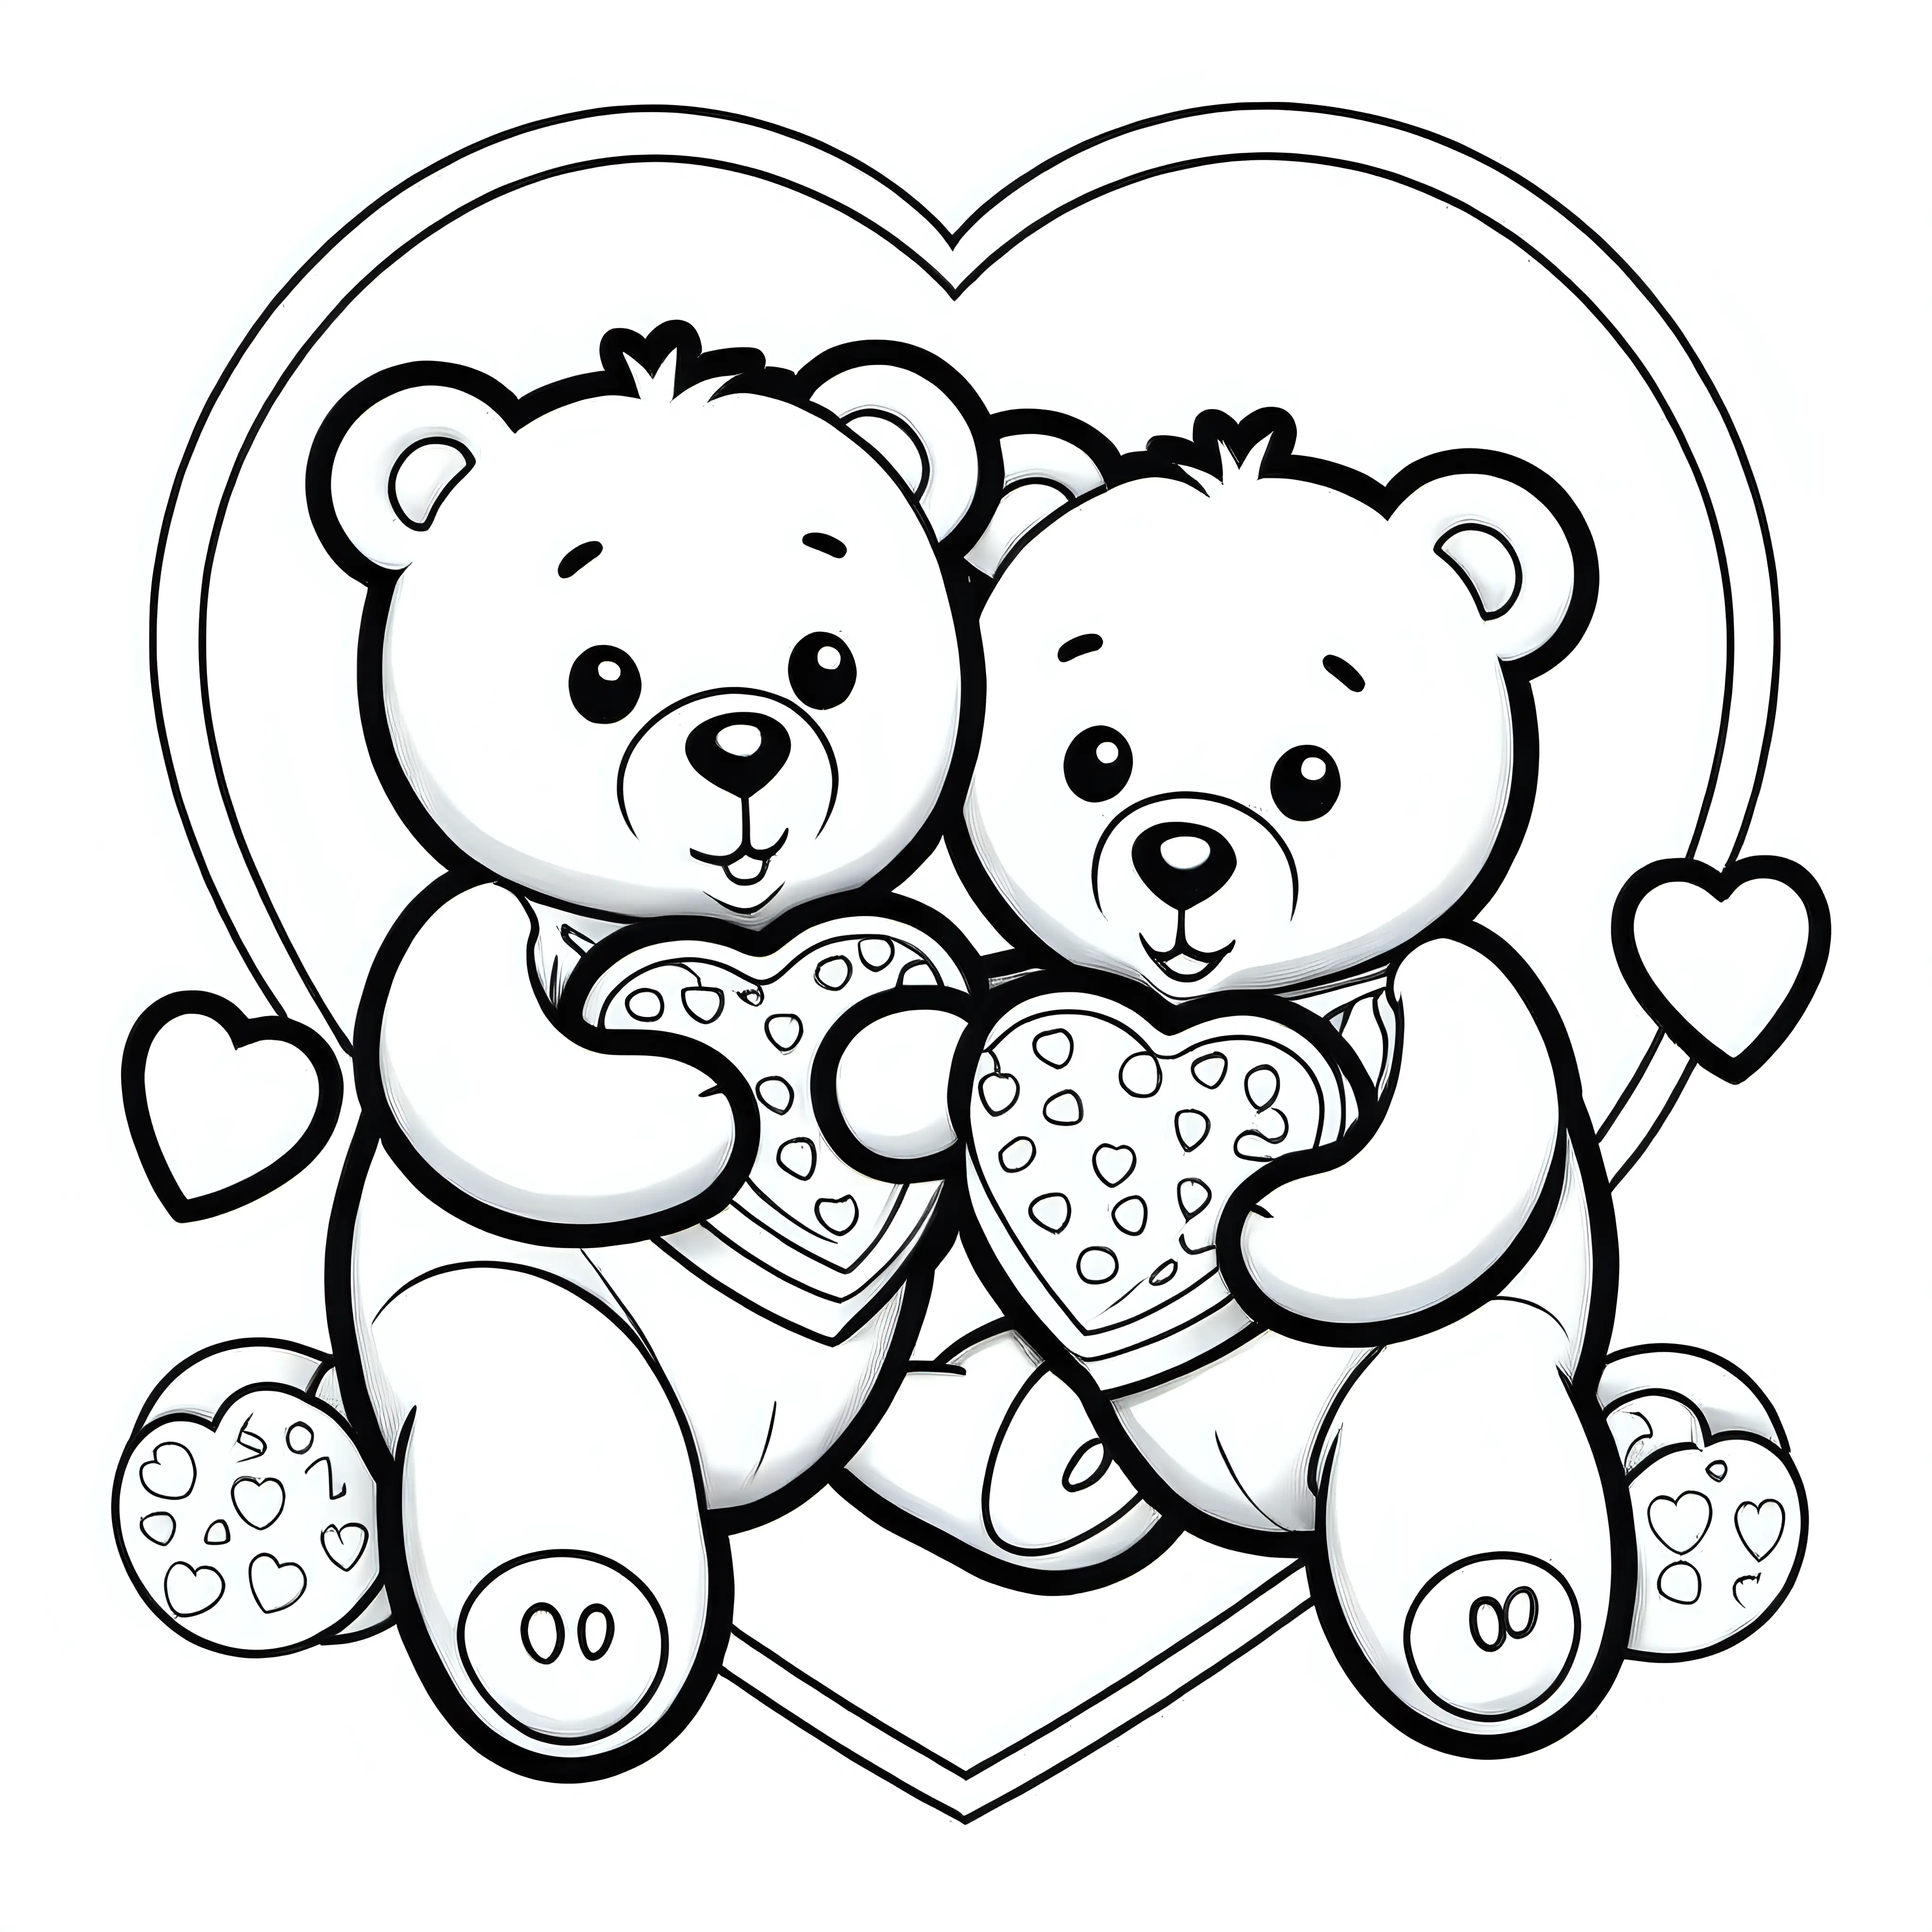 Adorable teddy bears enjoying heartshaped cookies coloring page muse